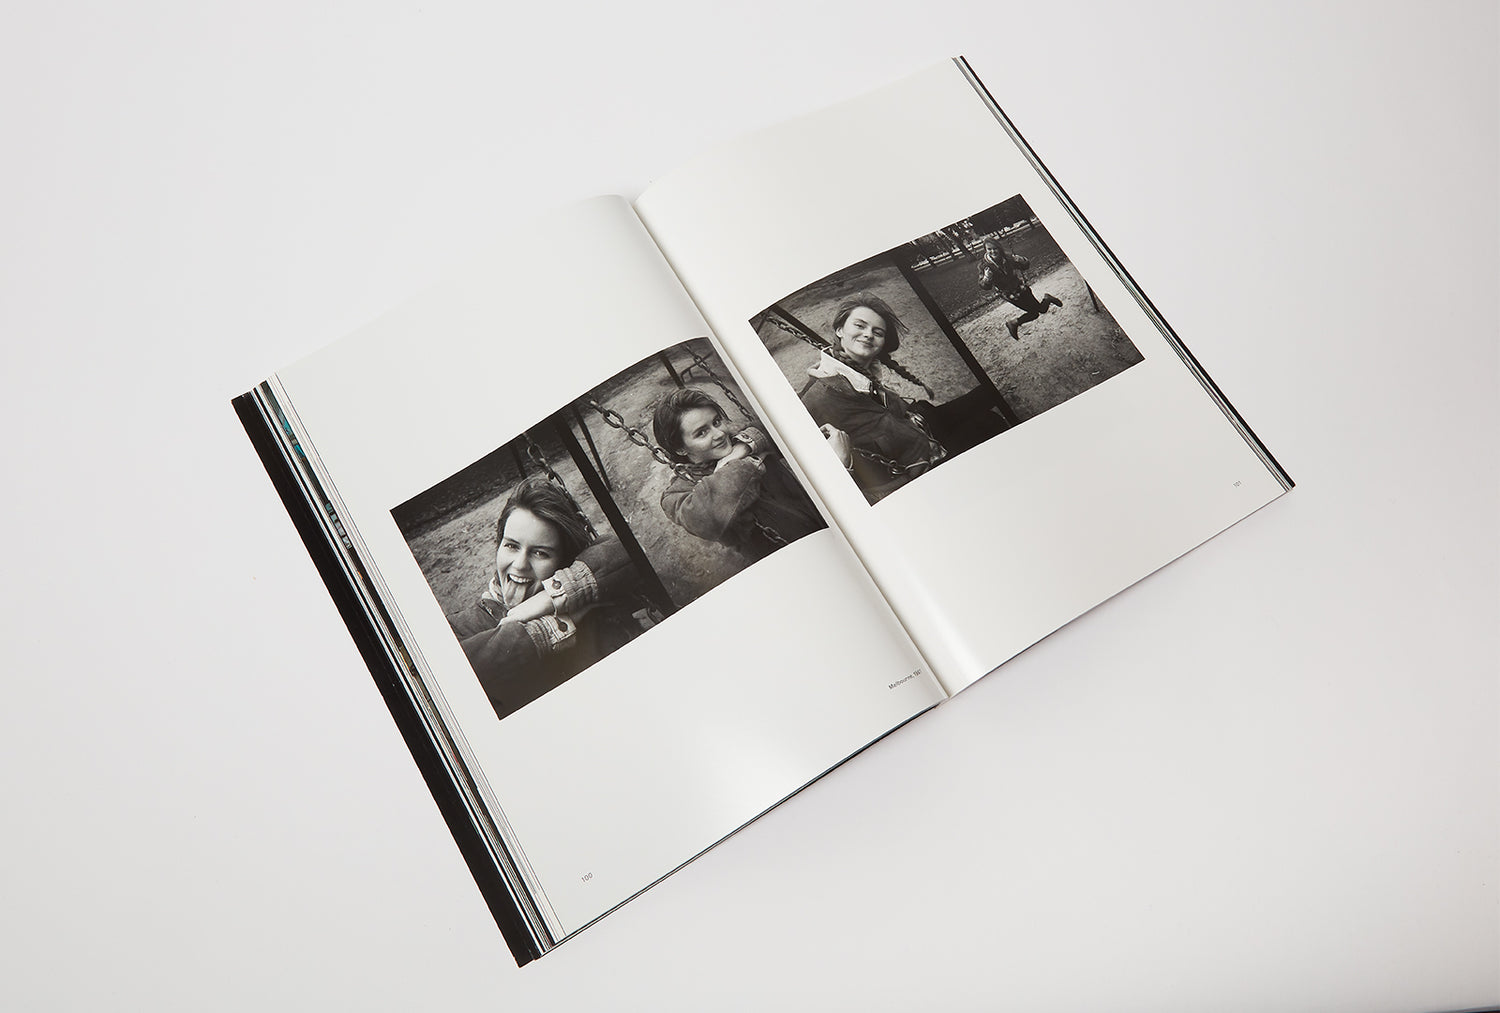 True Photo Journal, Issue Two (2016)